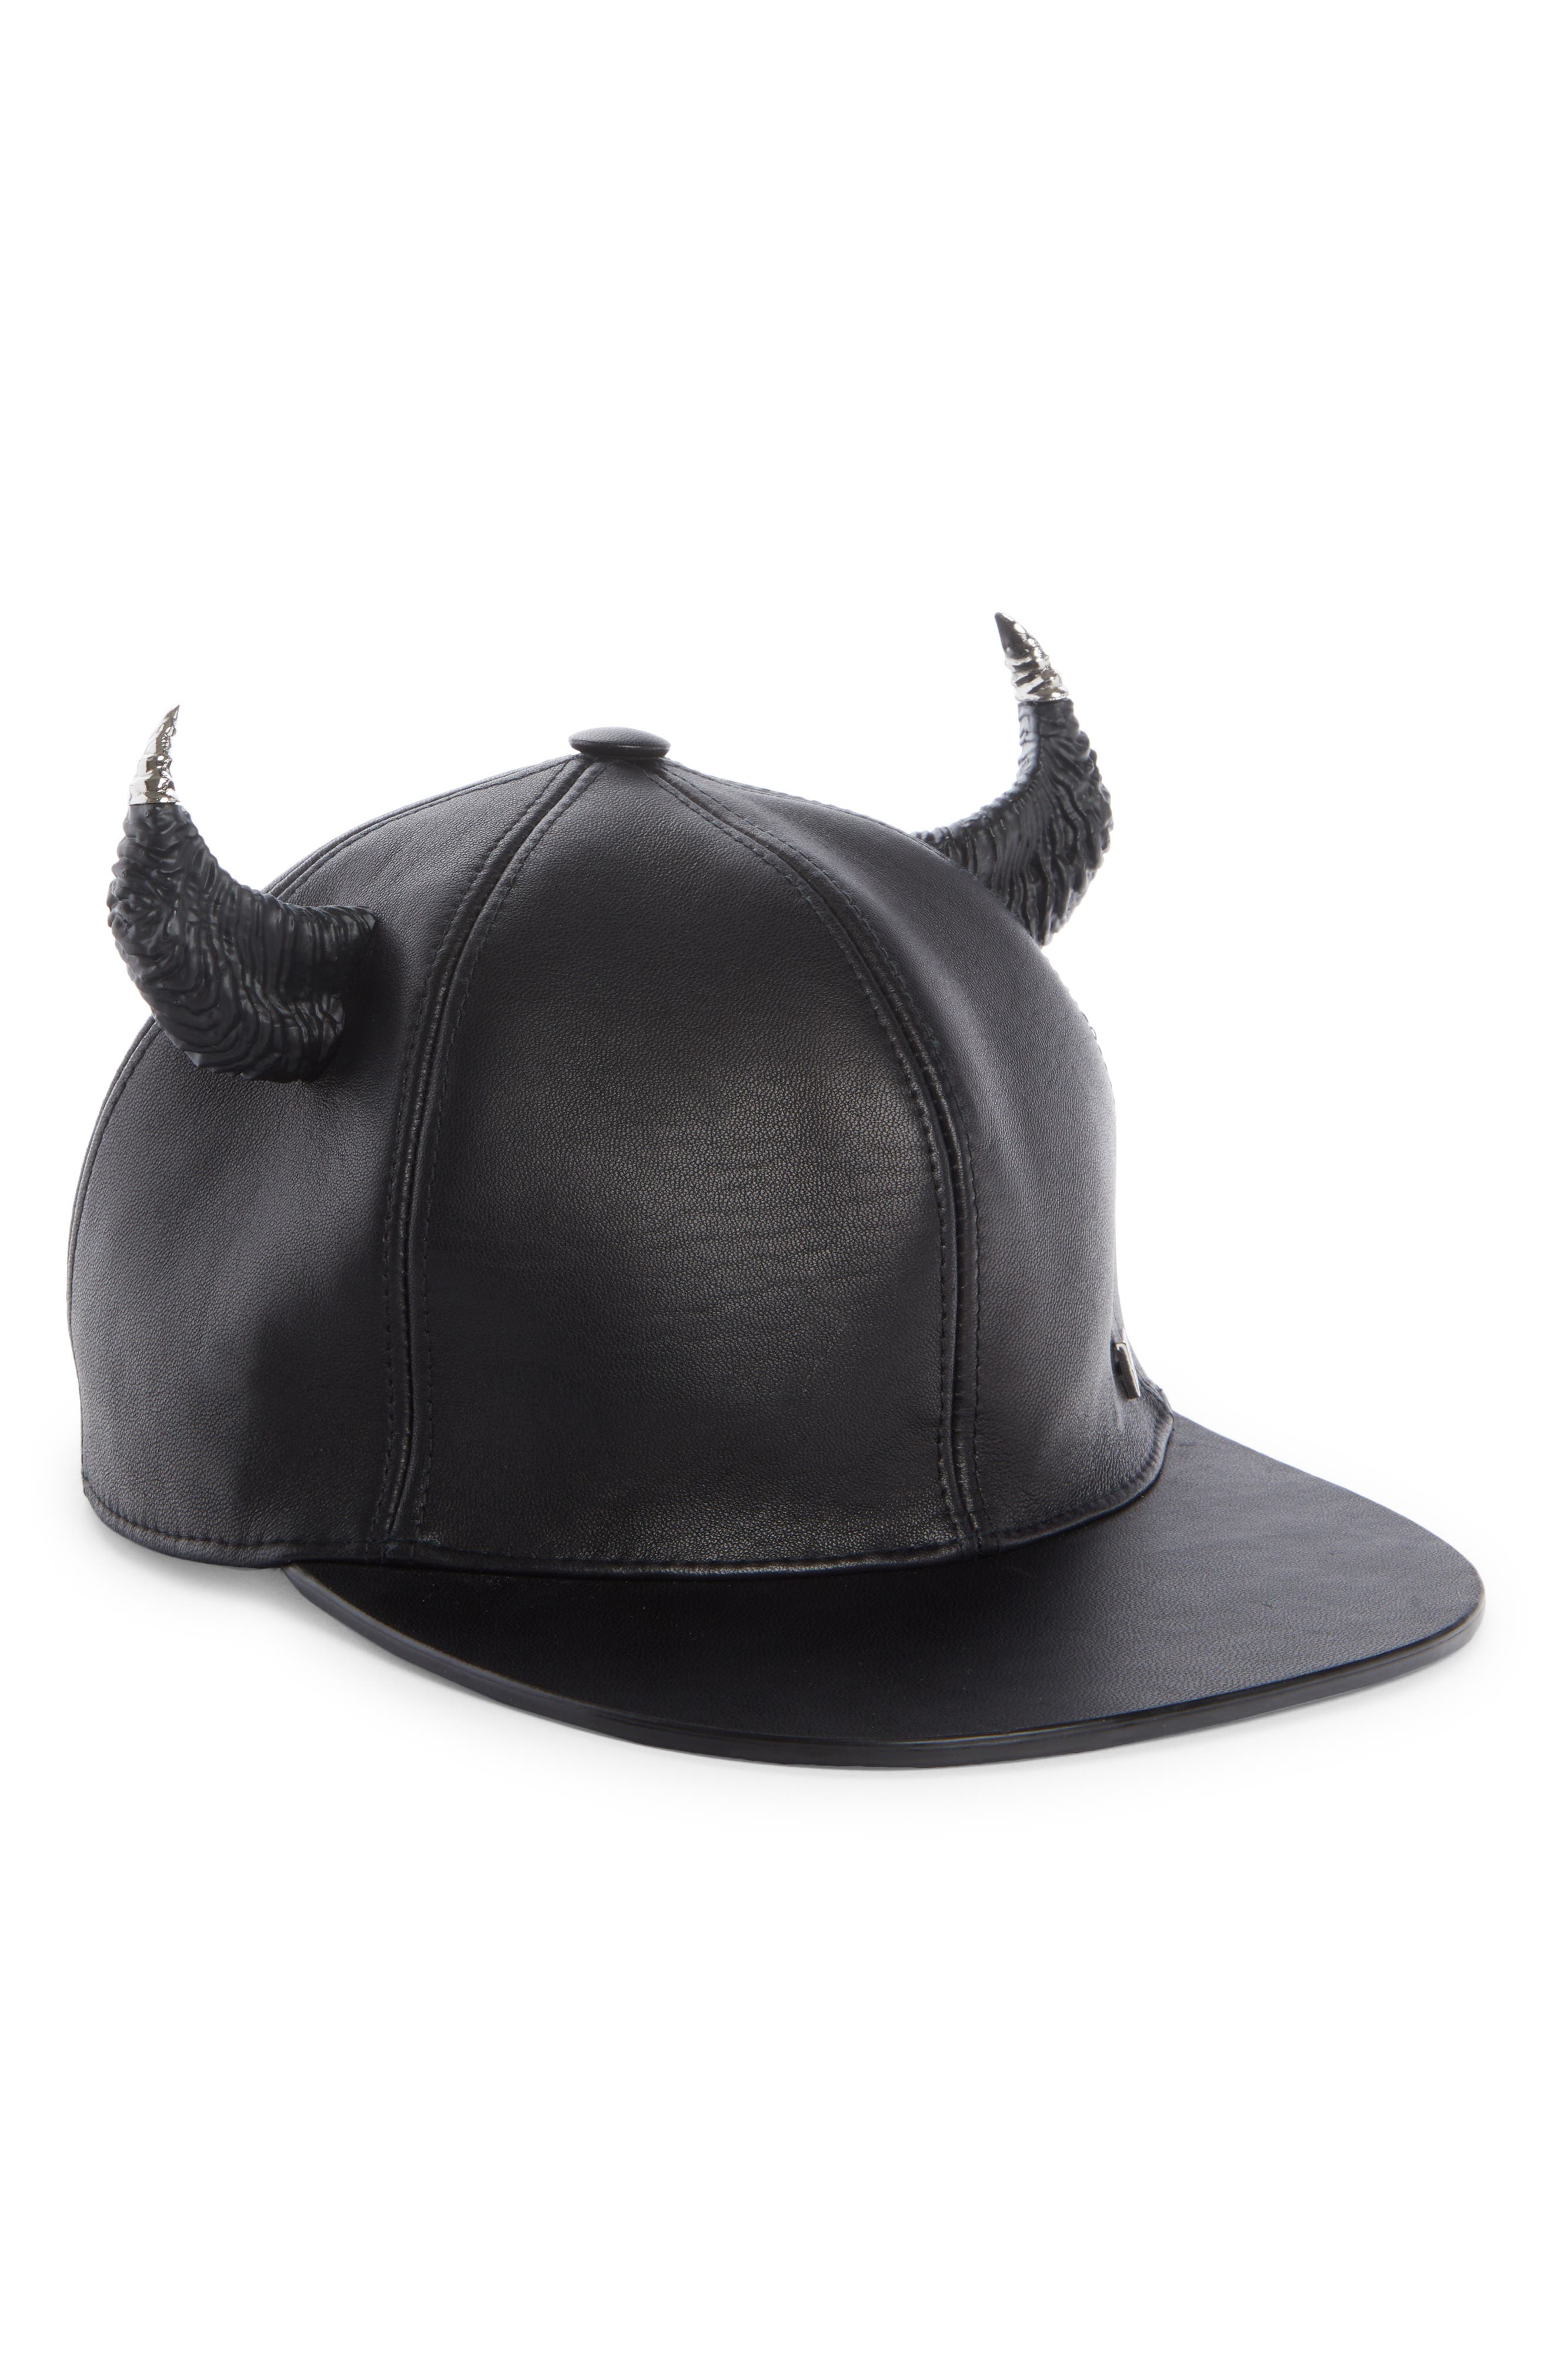 Givenchy Leather Baseball Cap with 